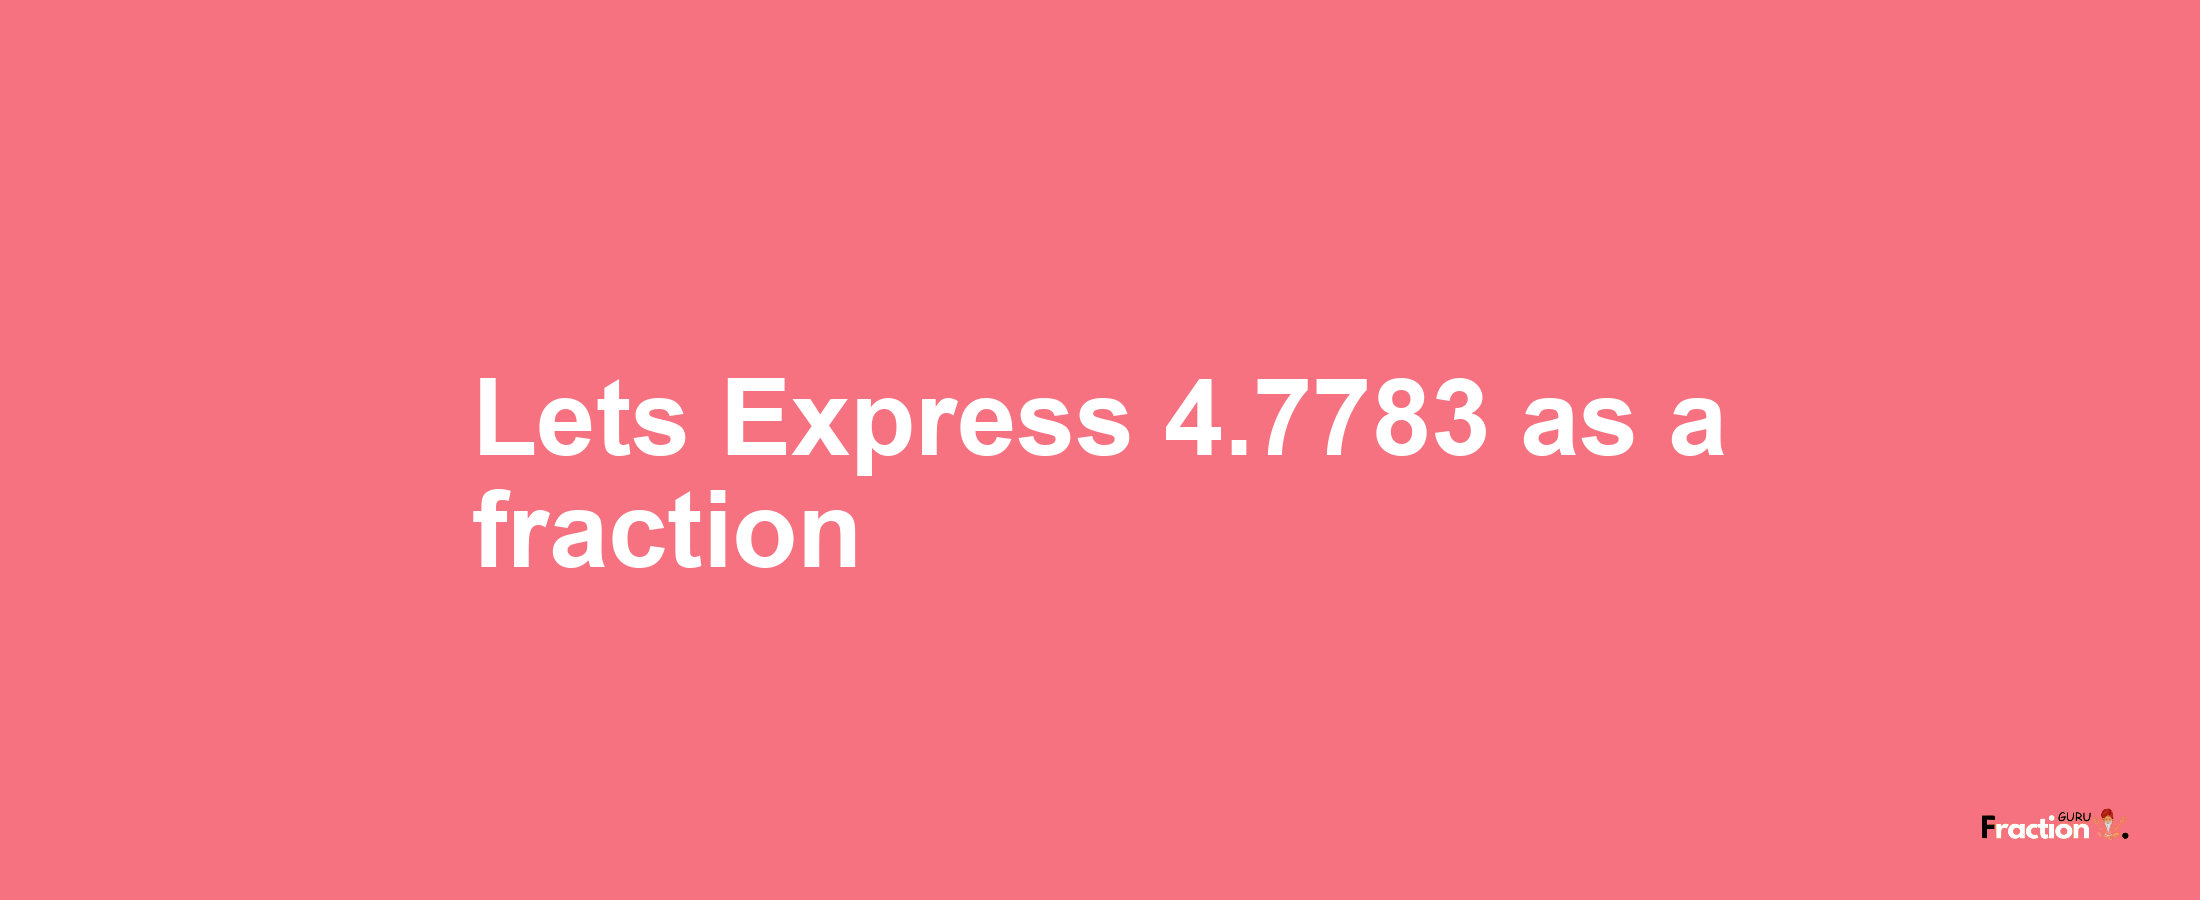 Lets Express 4.7783 as afraction